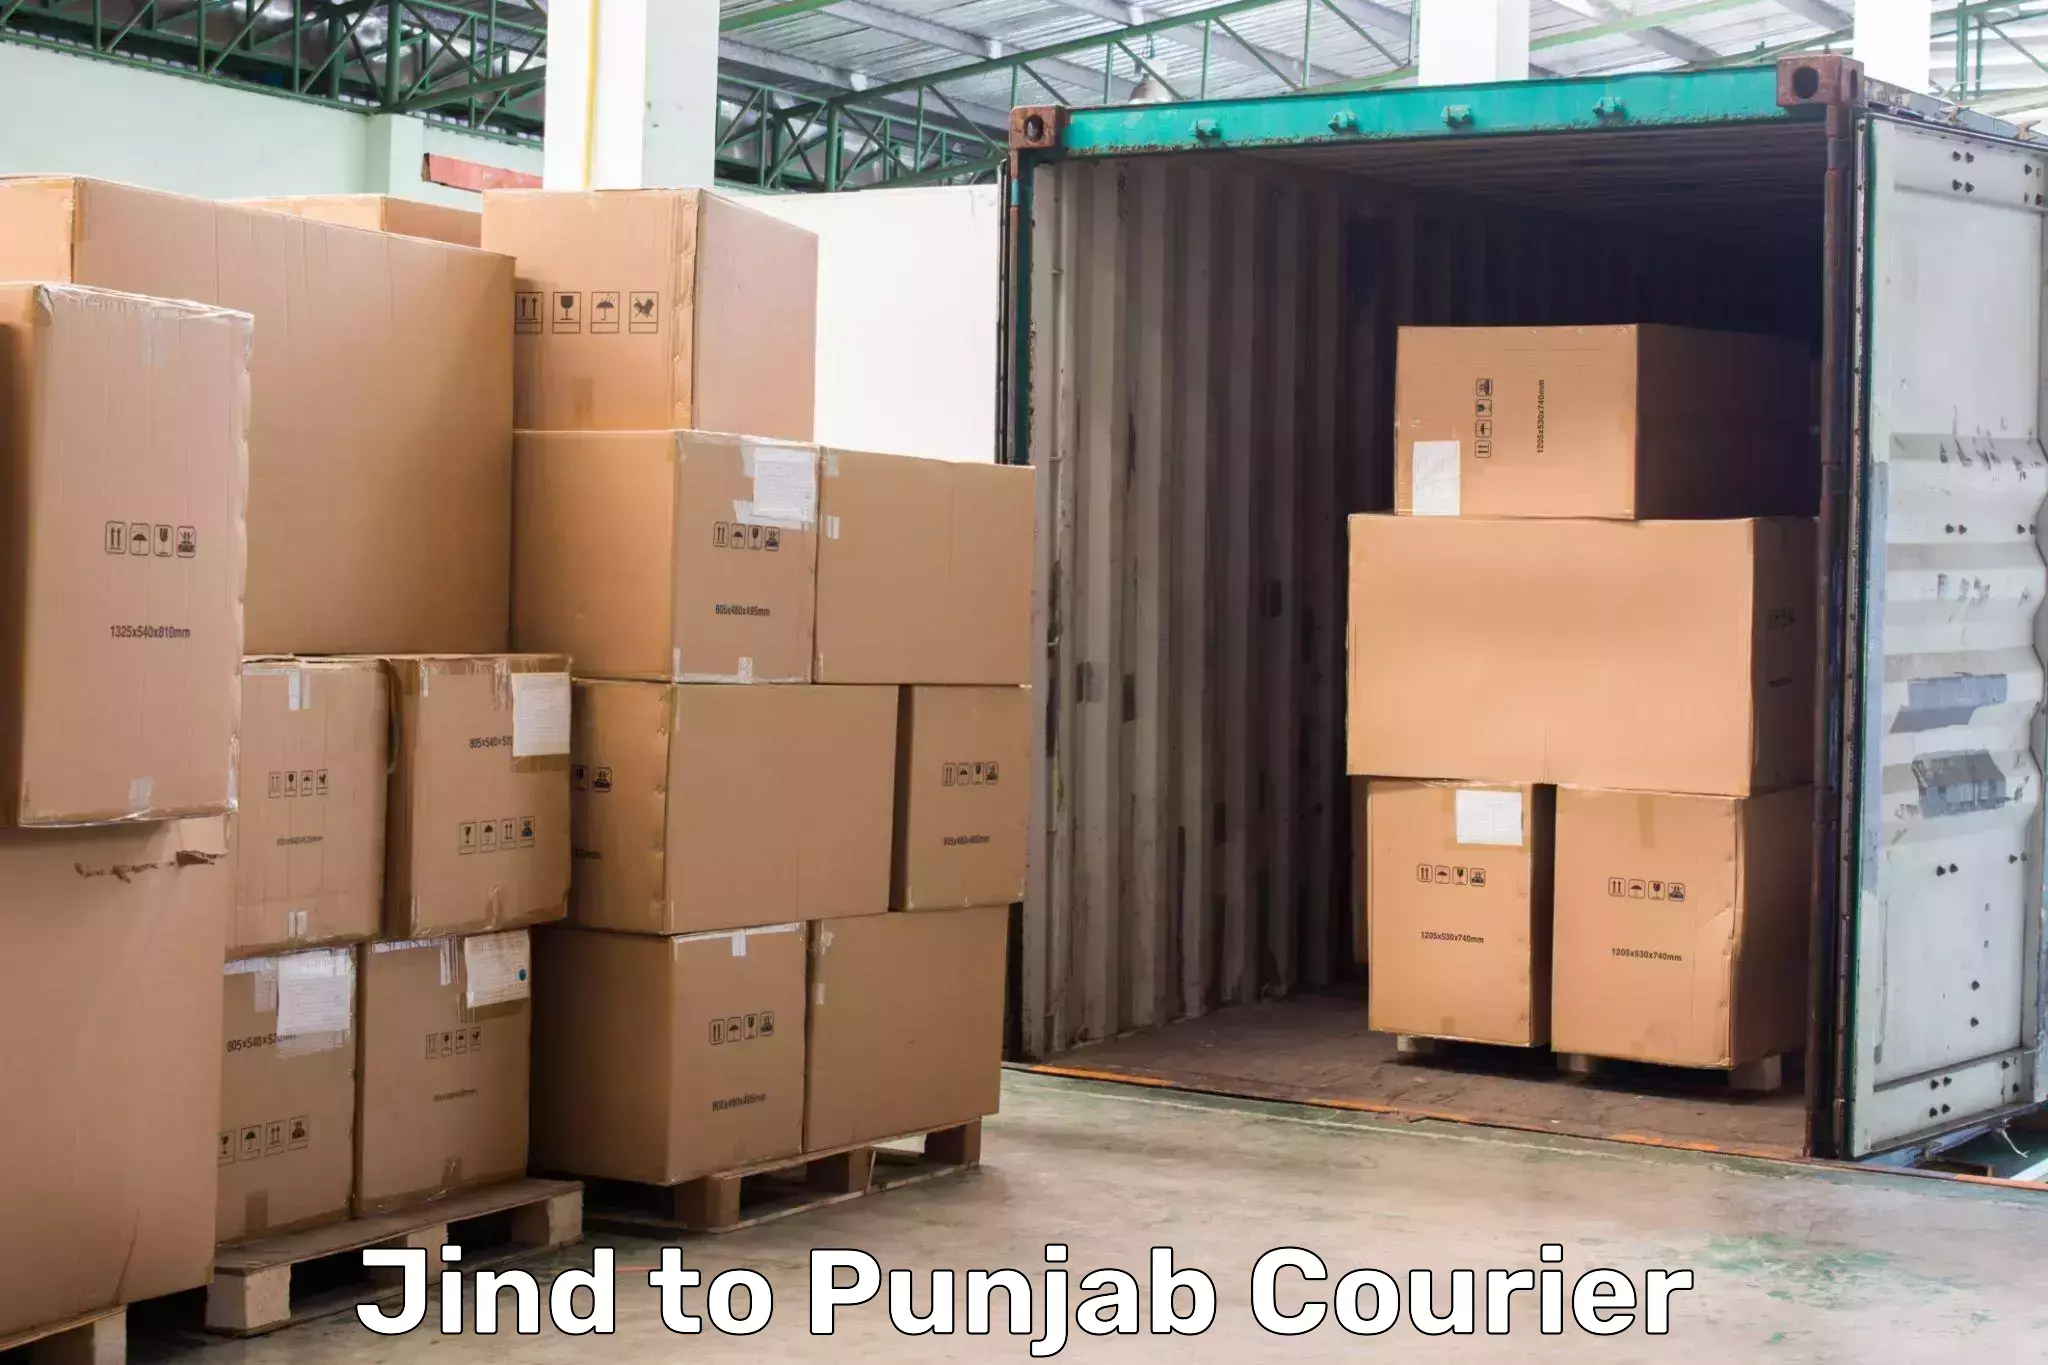 Seamless shipping experience Jind to Bathinda